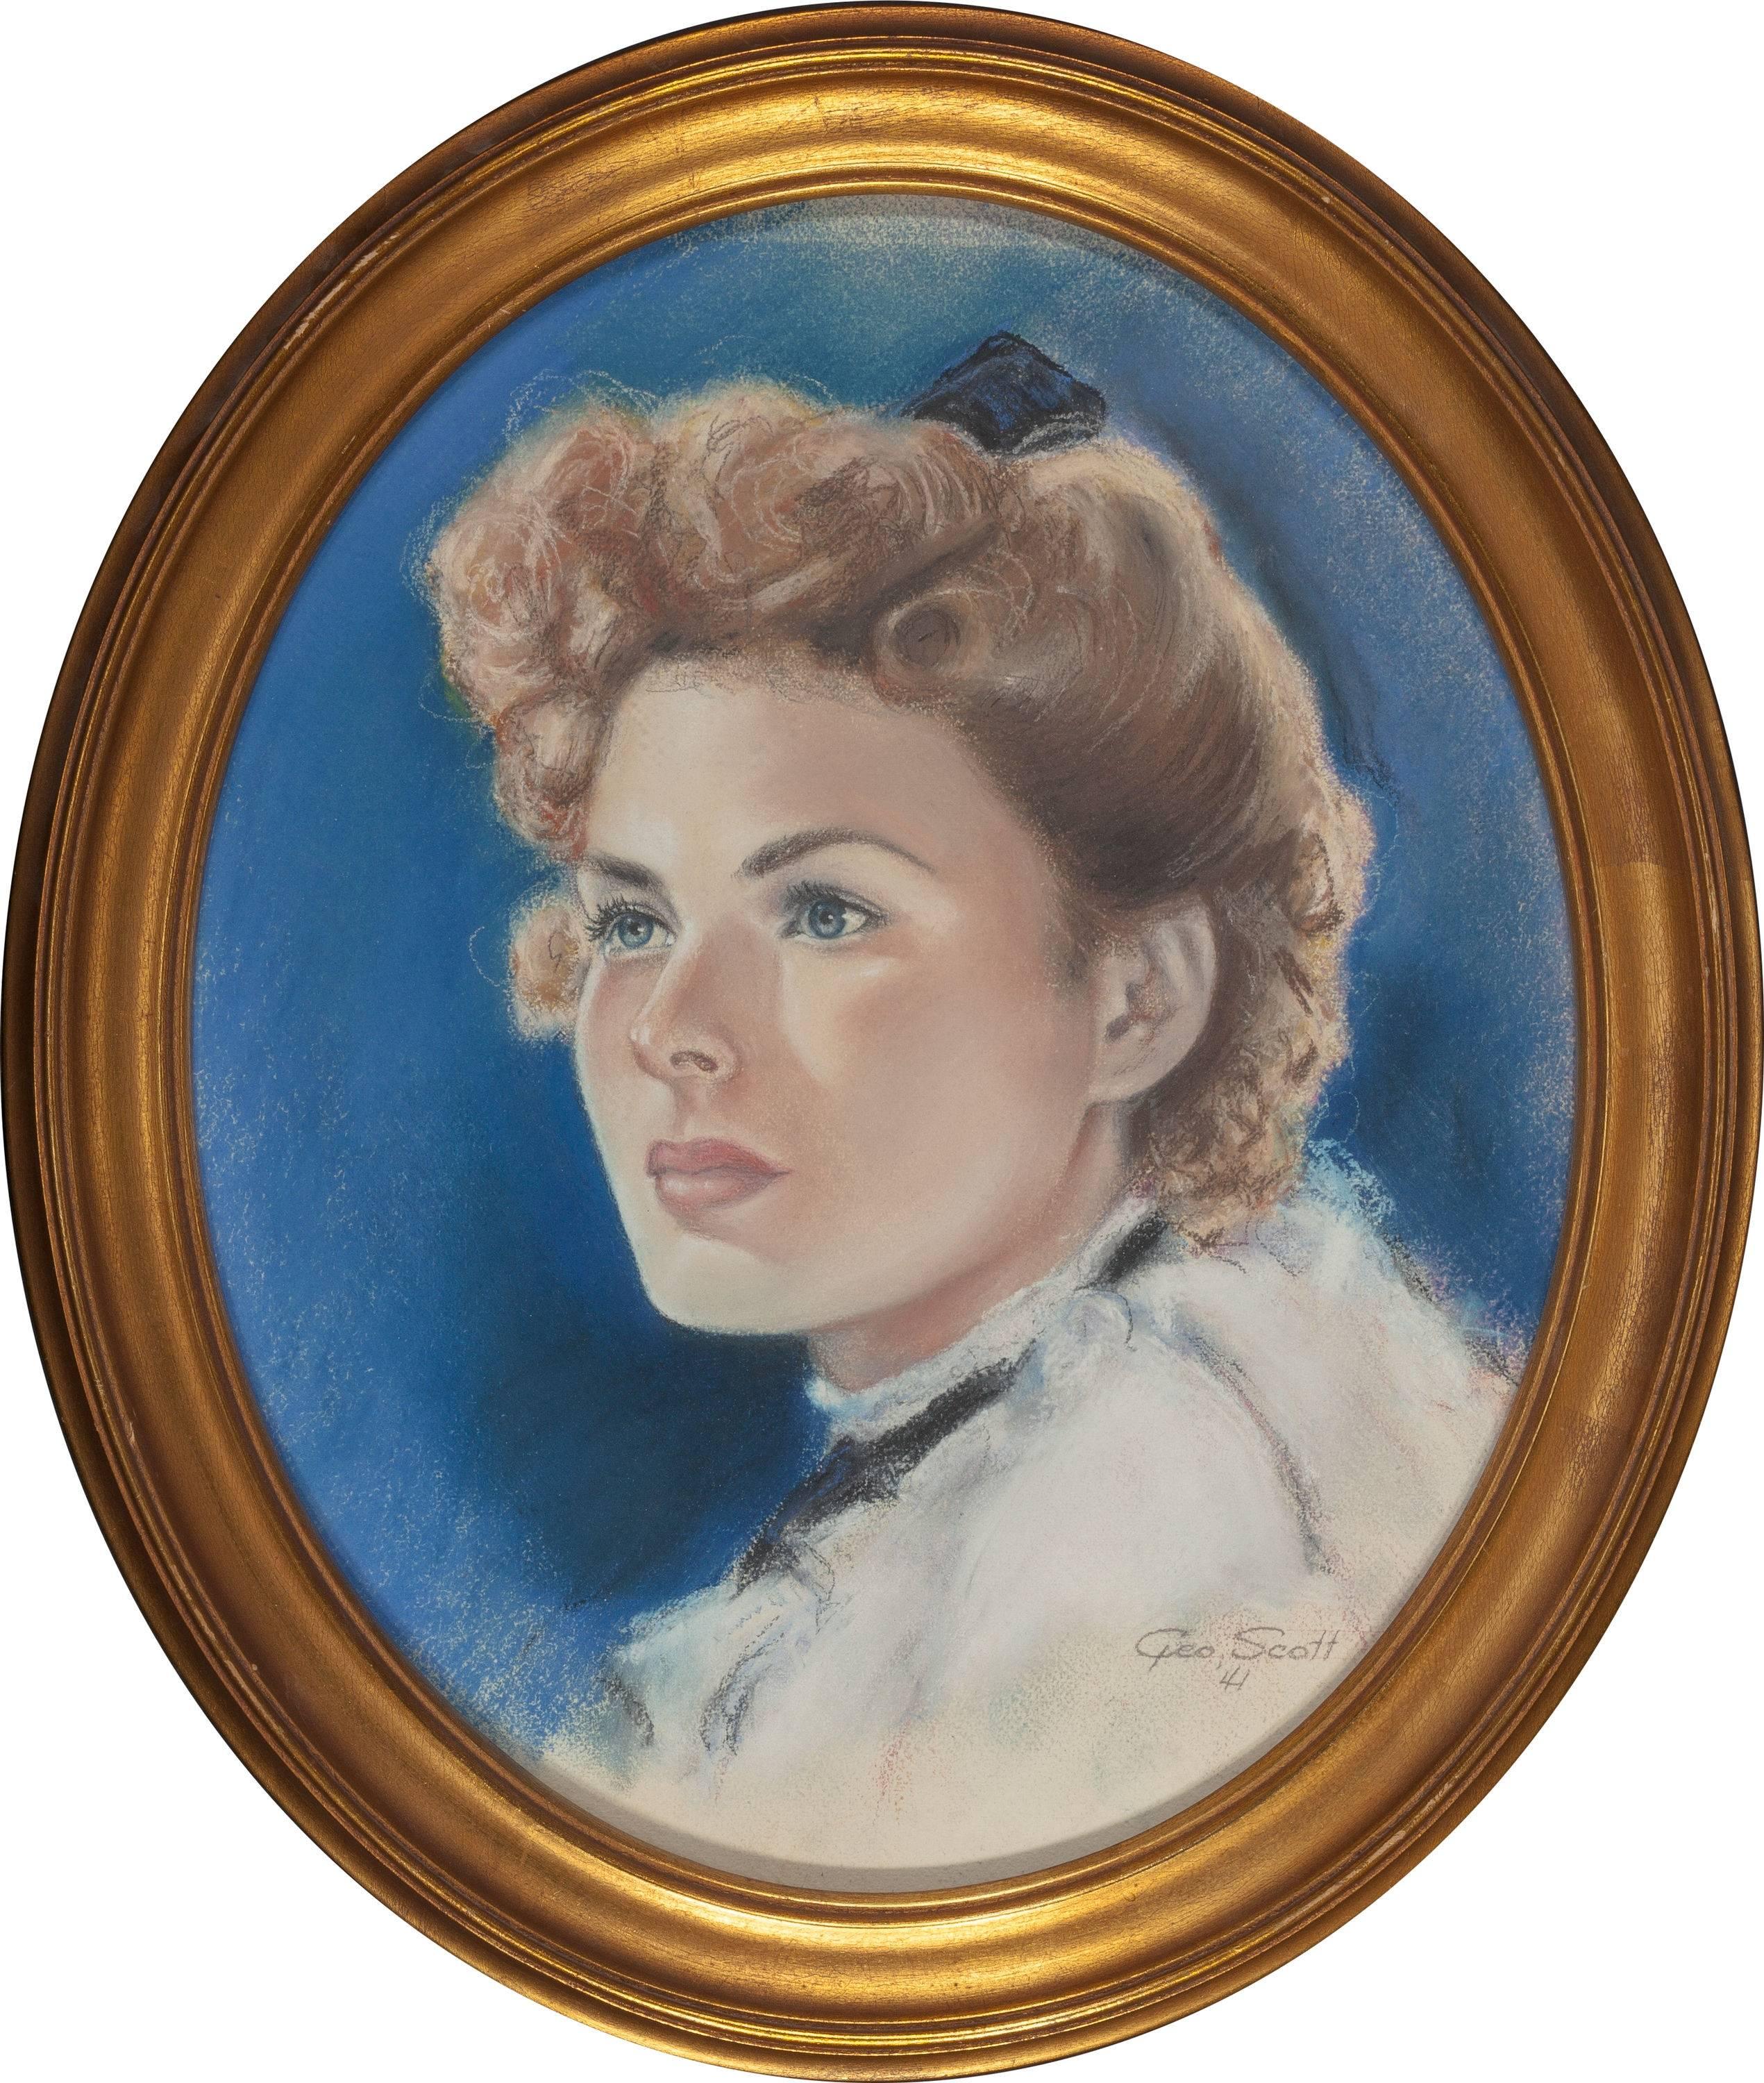 Ingrid Bergman from Dr. Jekyll and Mr. Hyde - Painting by Georges Bertin Scott